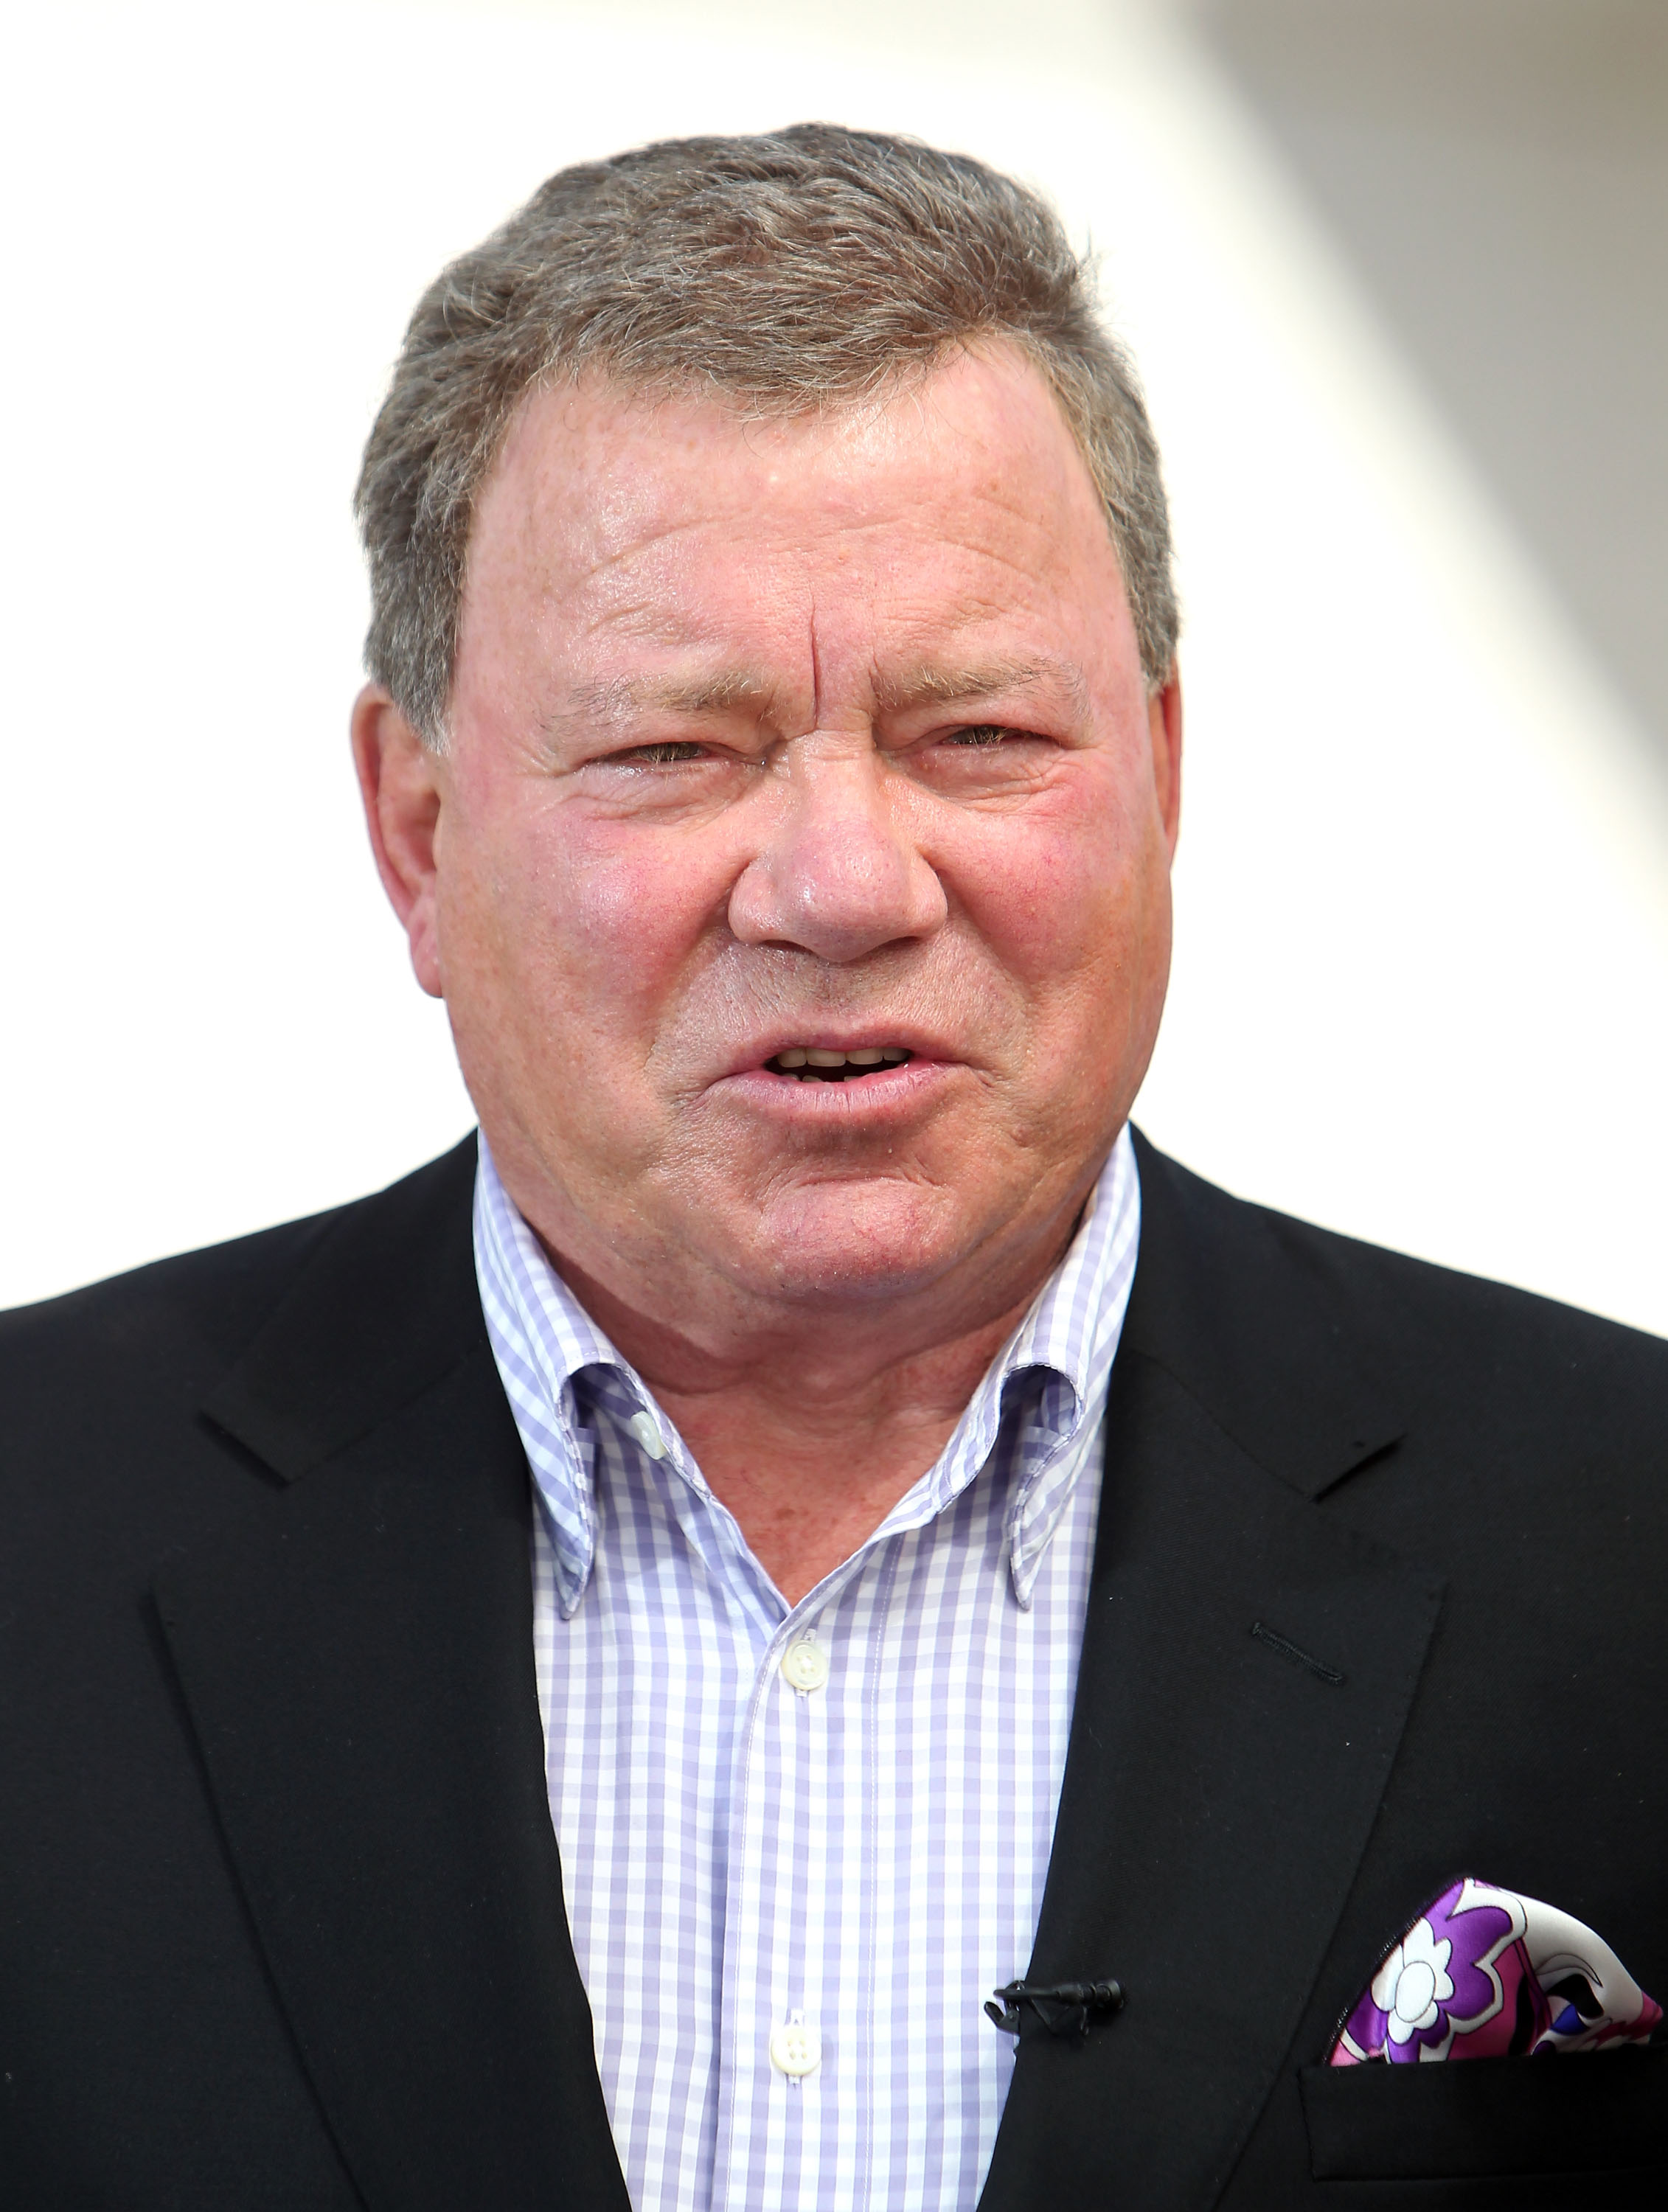 William Shatner appears on 